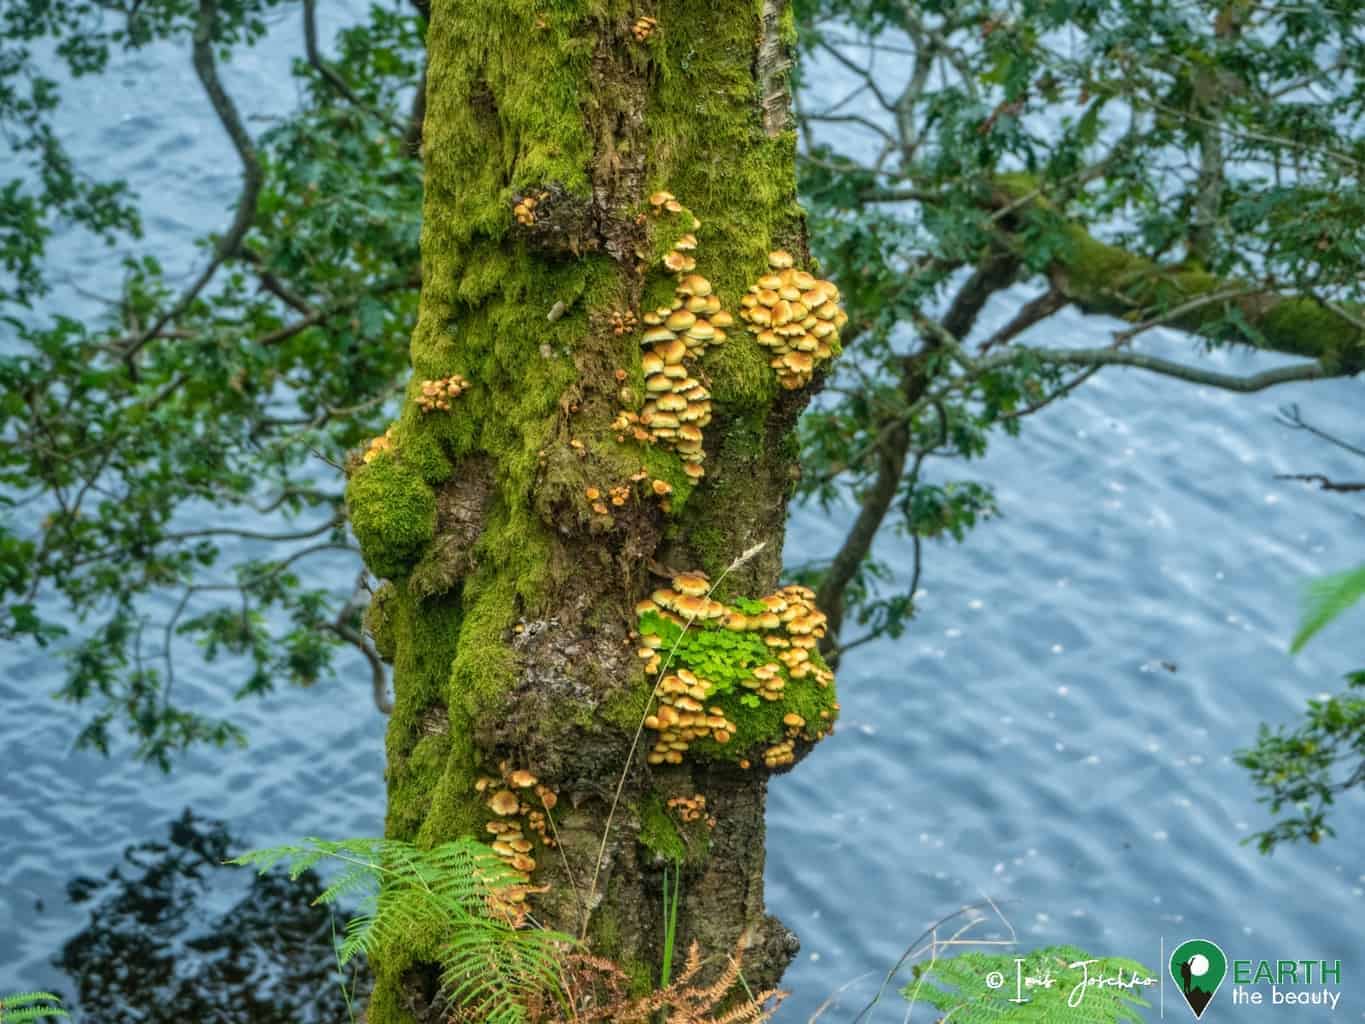 fungi on a tree trunk next to water